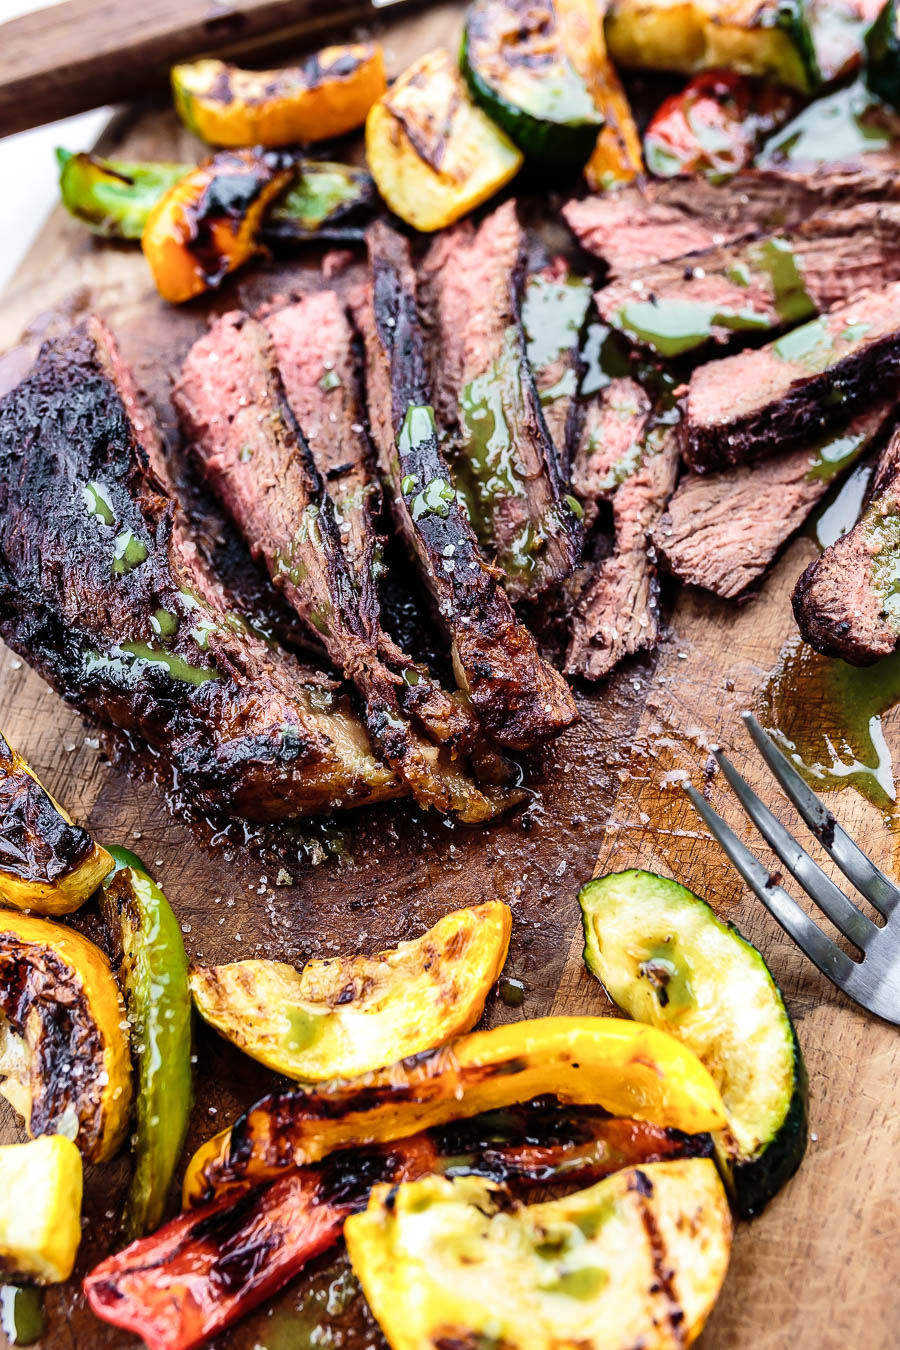 grilled picanha steak with vegetables and chimichurri served on a cutting board